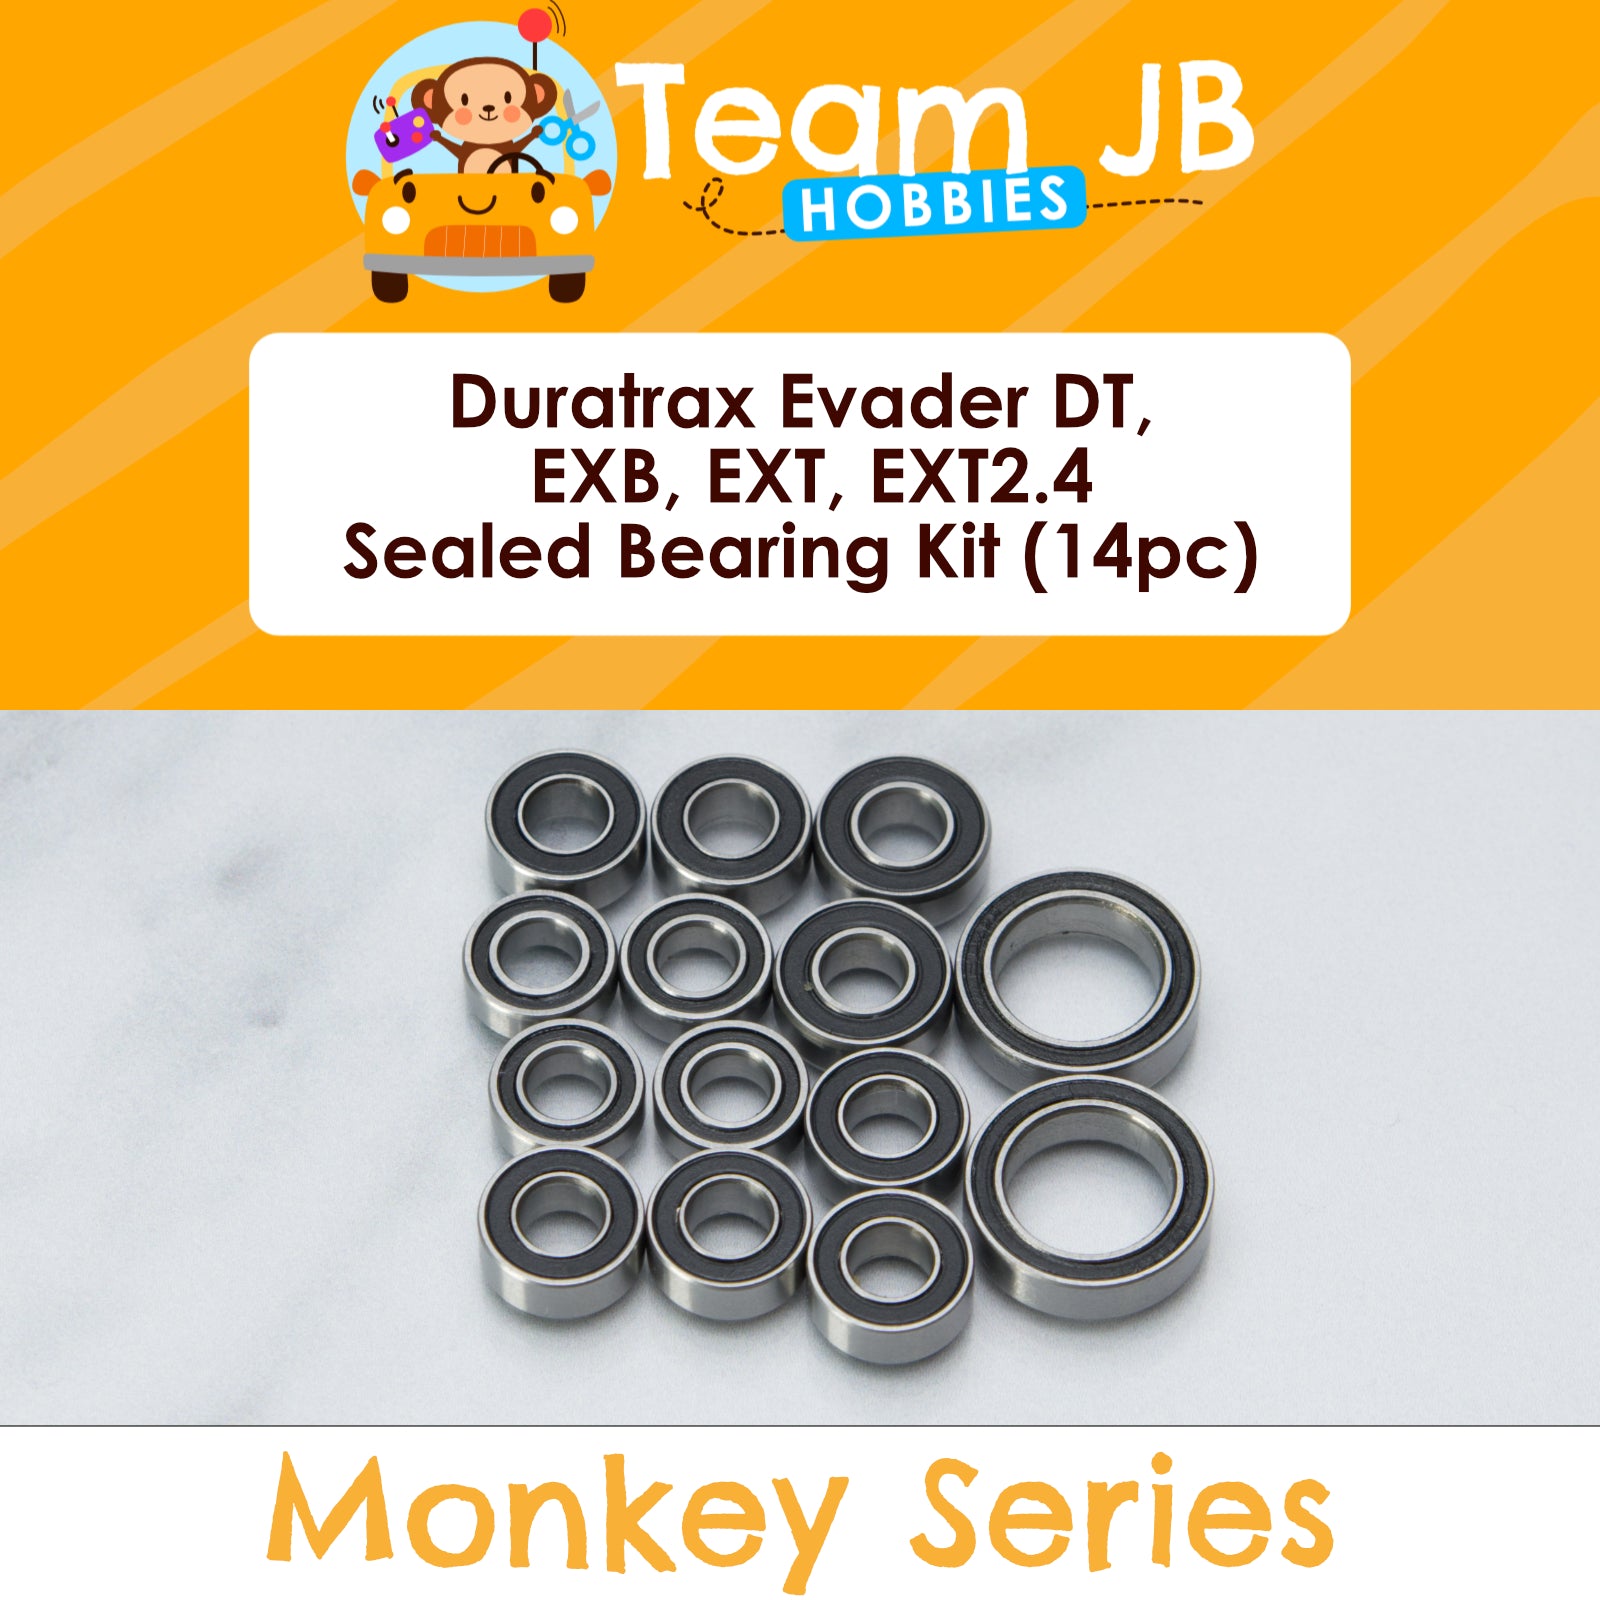 Duratrax Evader DT, EXB, EXT, EXT2.4 - Sealed Bearing Kit